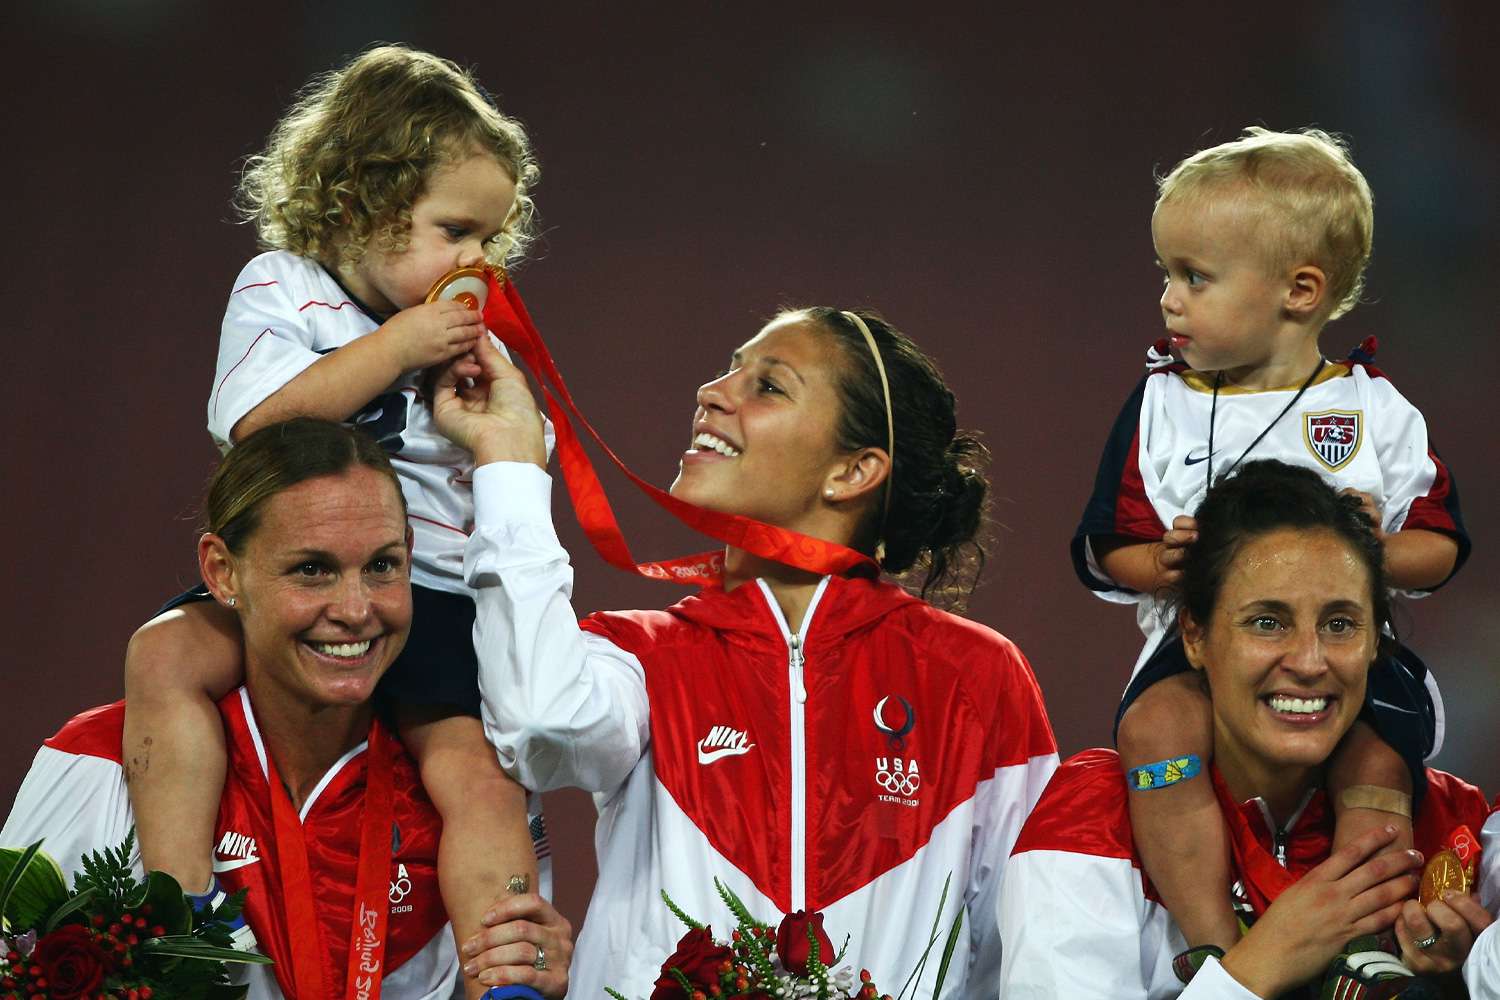 USA team members Christie Rampone, Carli Lloyd, Kate Markgraf and children pose on the podium with their Gold medals after the Women's Football on Day 13 of the Beijing 2008 Olympic Games on August 21, 2008